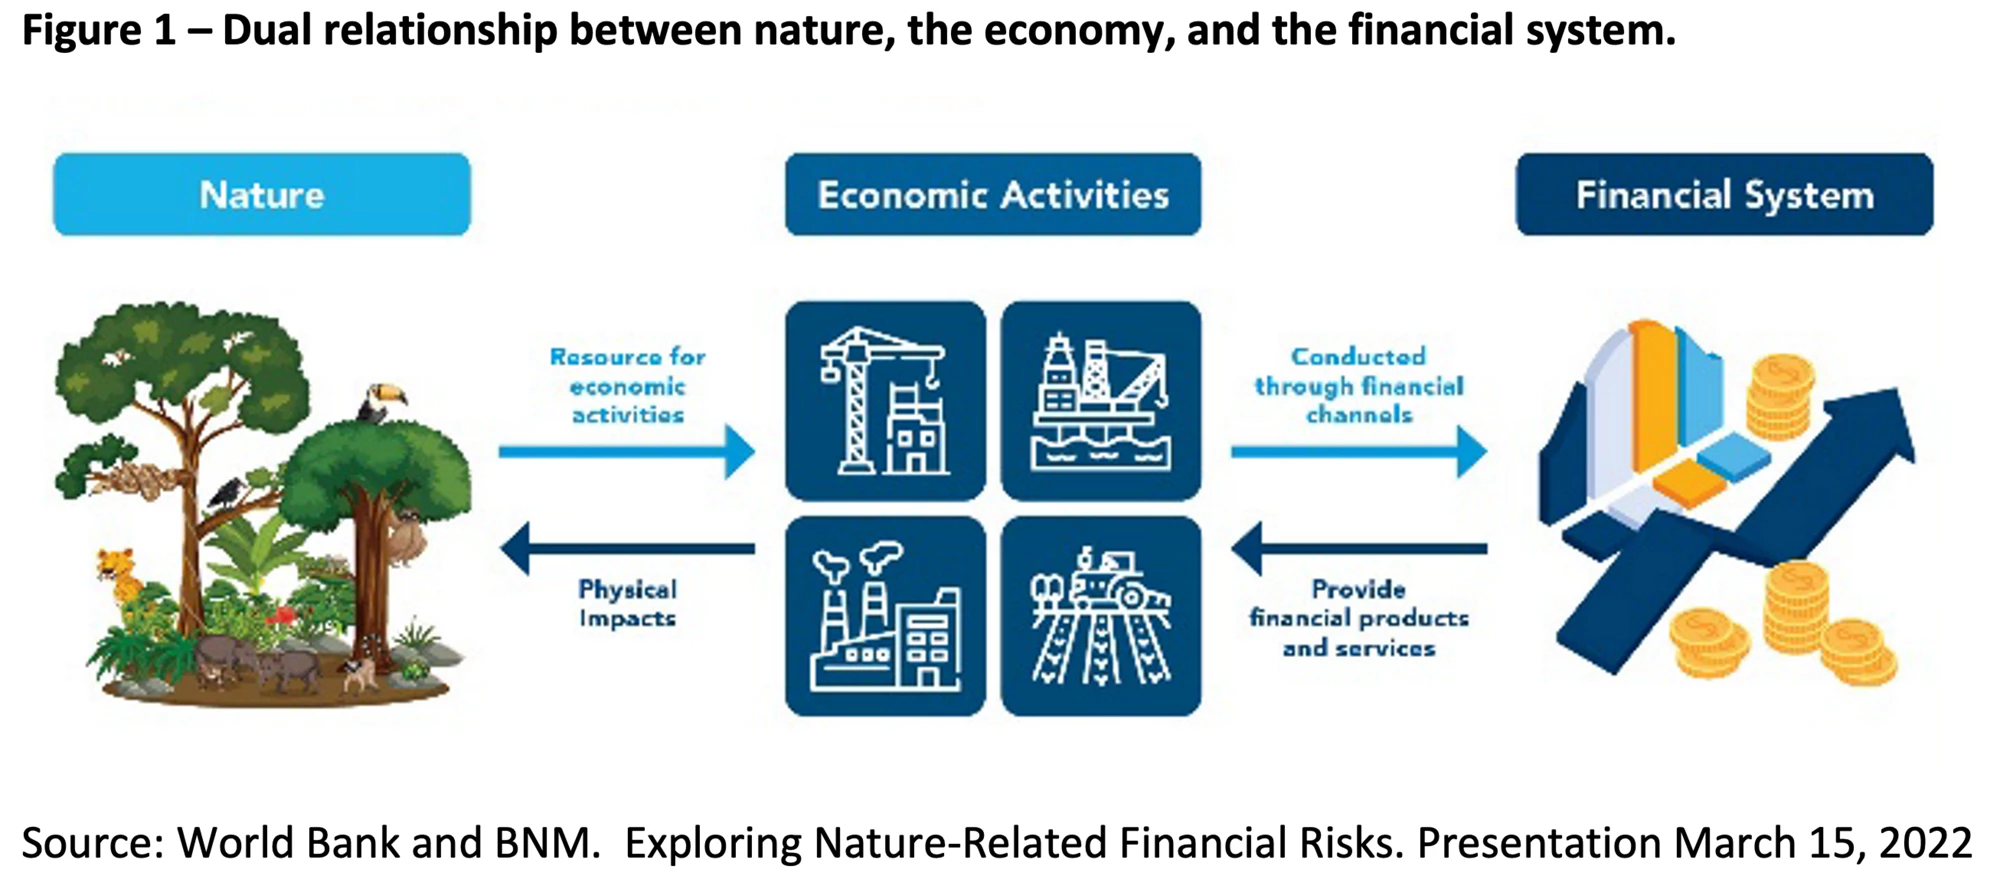 Illustration of the dual relationship between nature, the economy, and the financial system in Malaysia